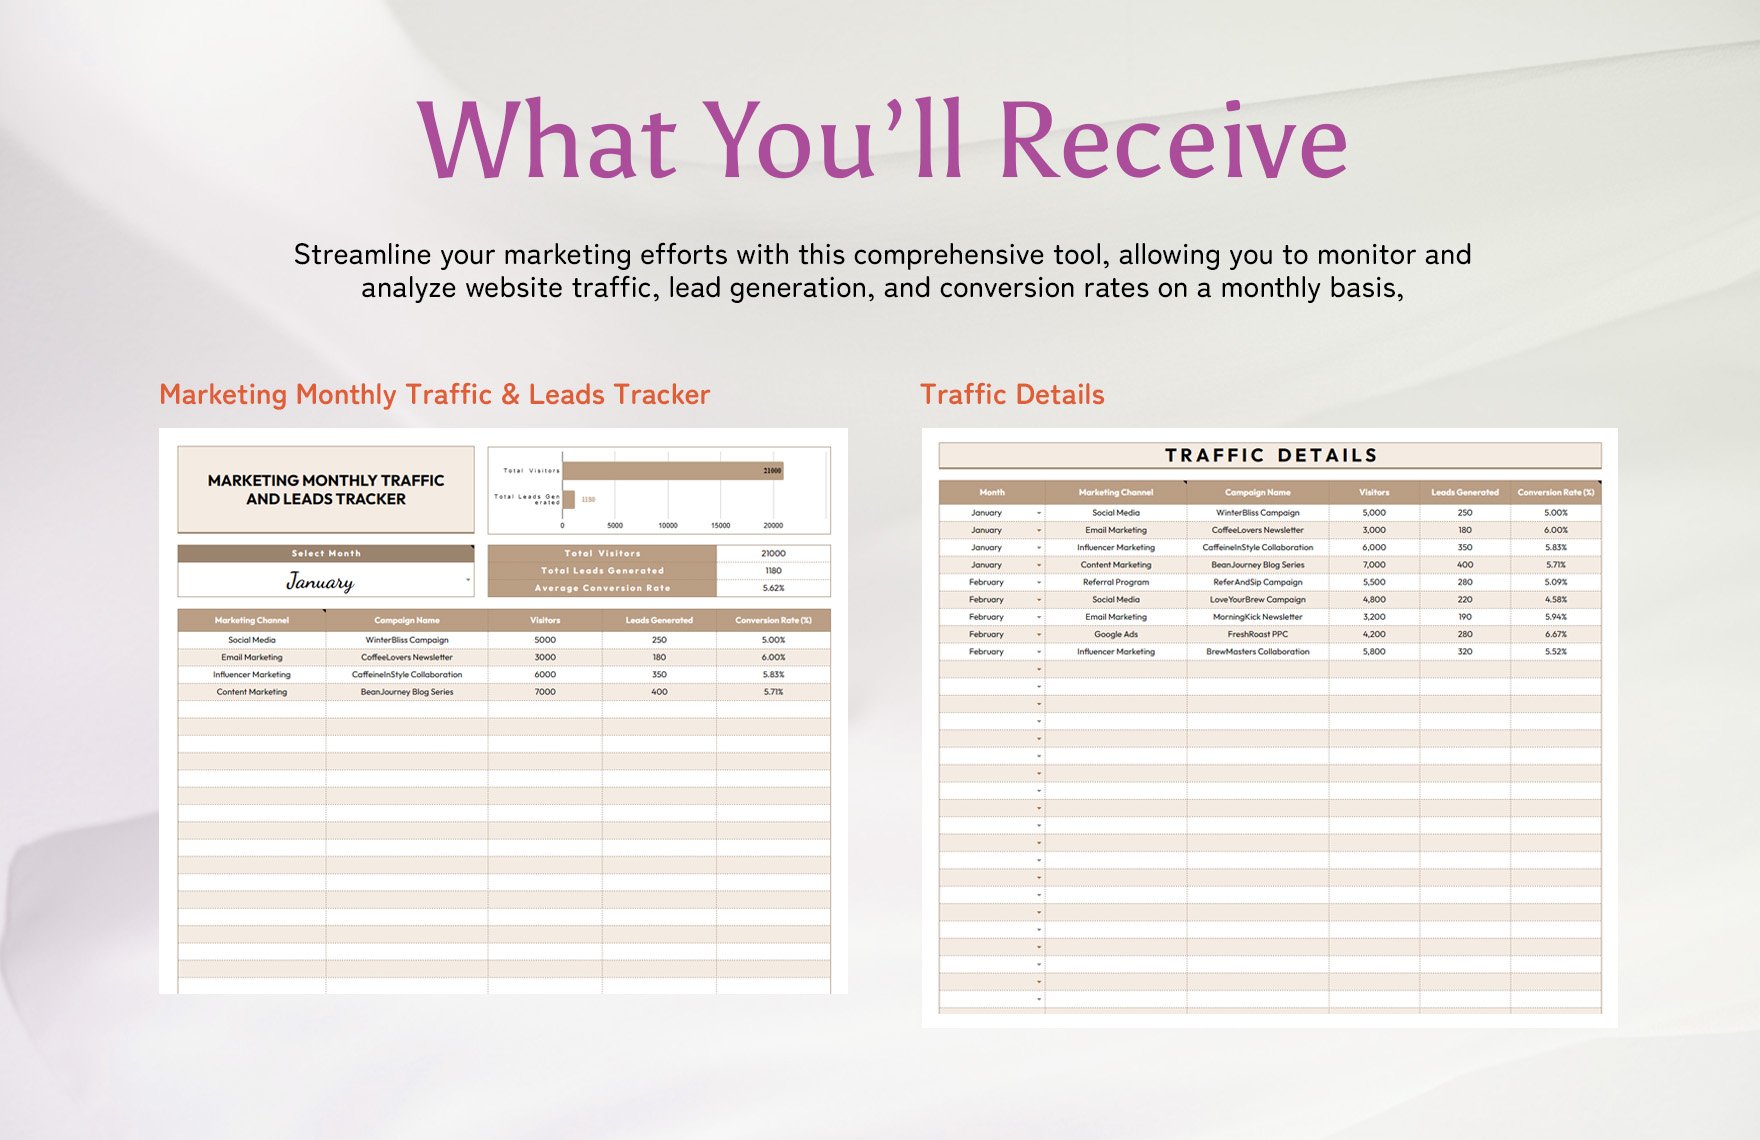 Marketing Monthly Traffic and Leads Tracker Template